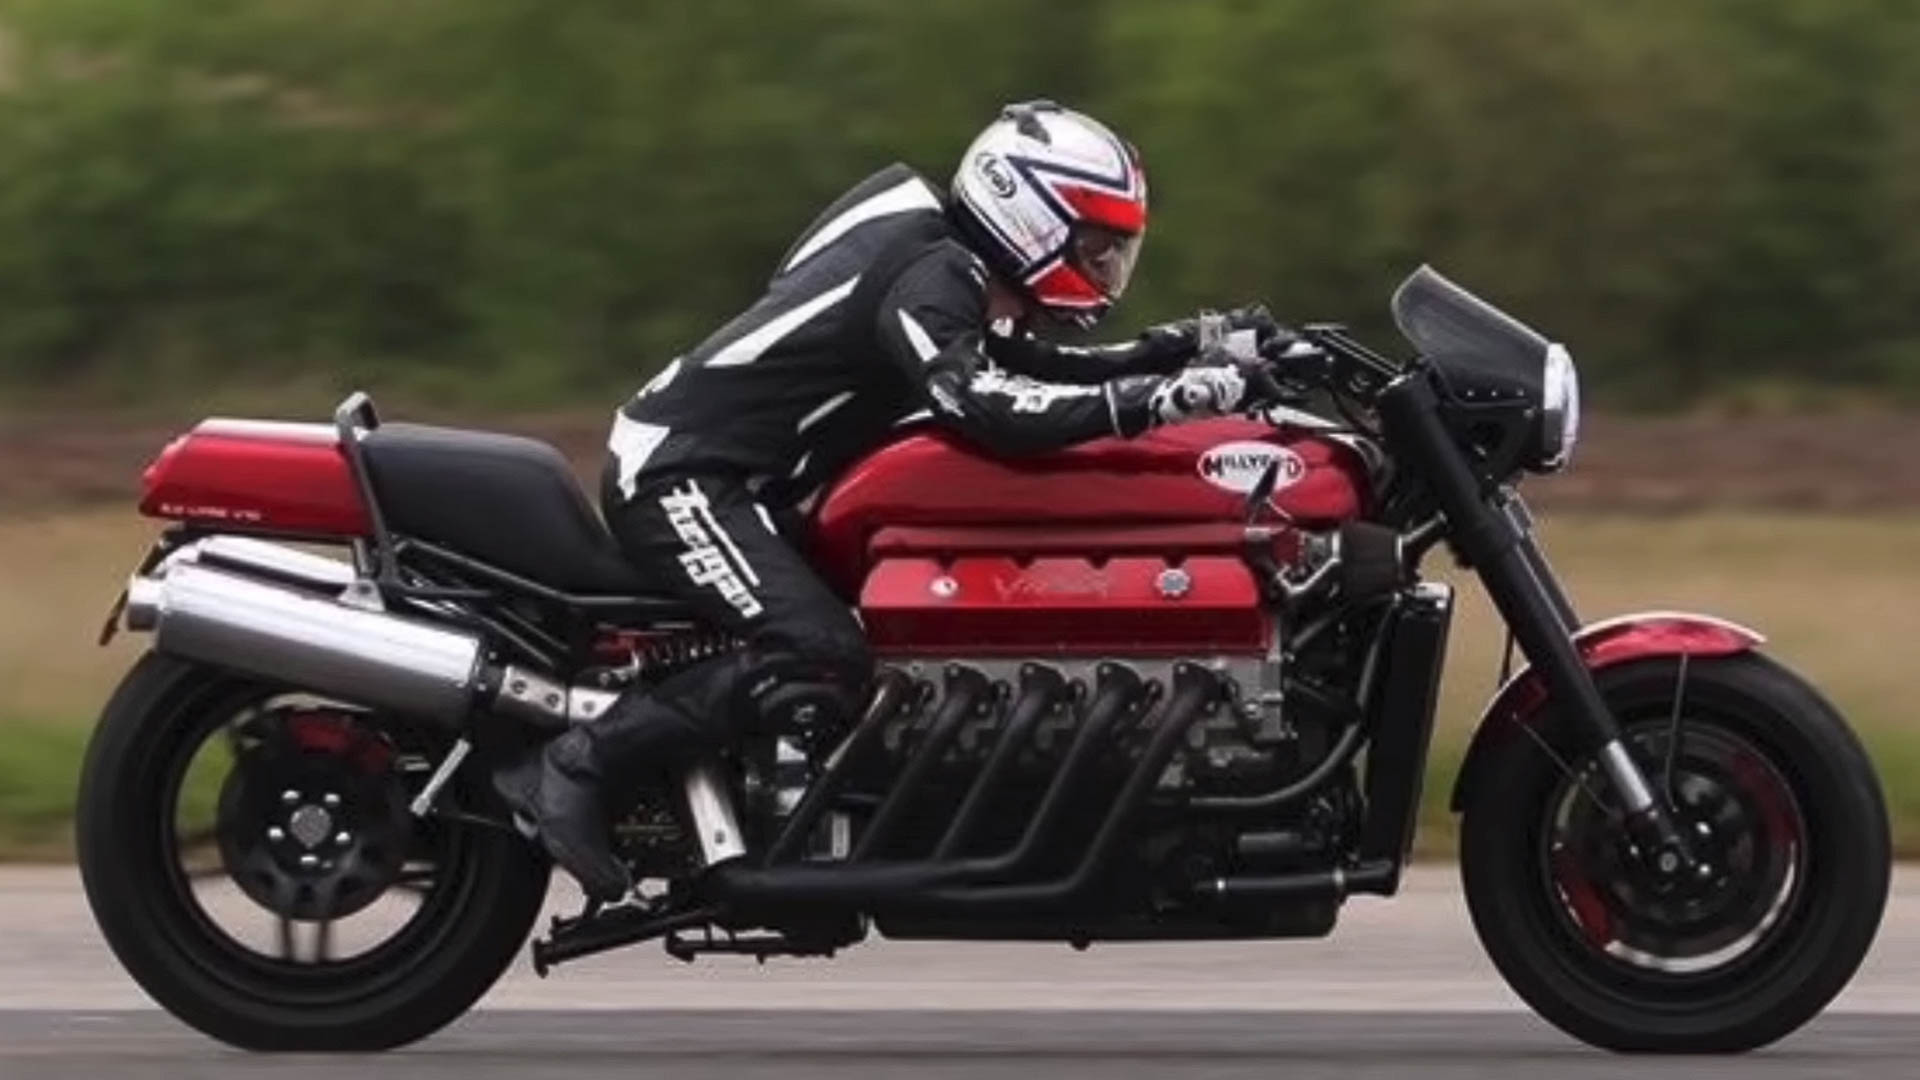 That 500-HP Viper V10 Motorcycle Just Set a New Speed Record